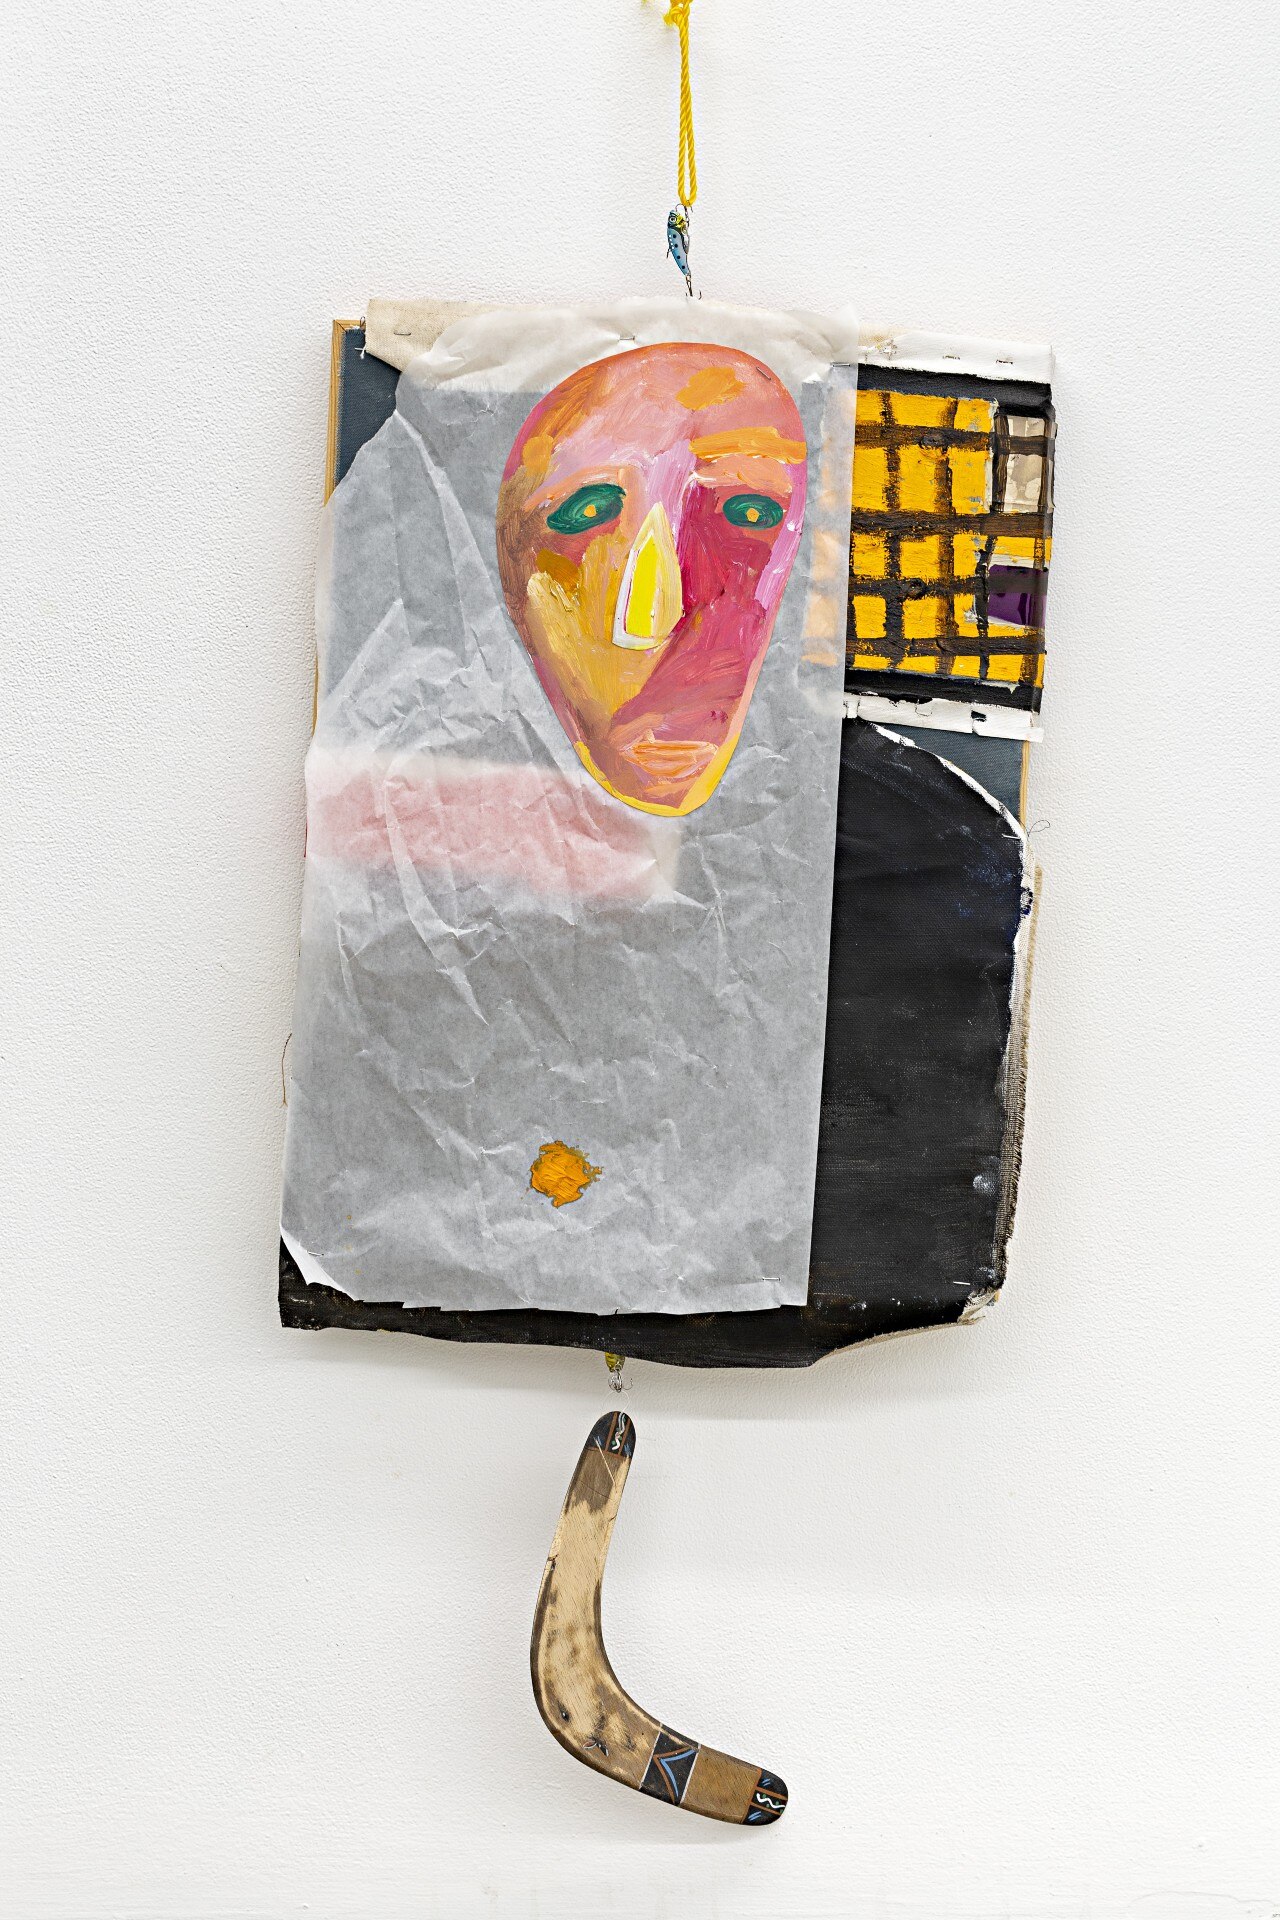 Abstract portrait painted on a layer of translucent paper attached to a painted canvas, with a boomerang hanging from the bottom